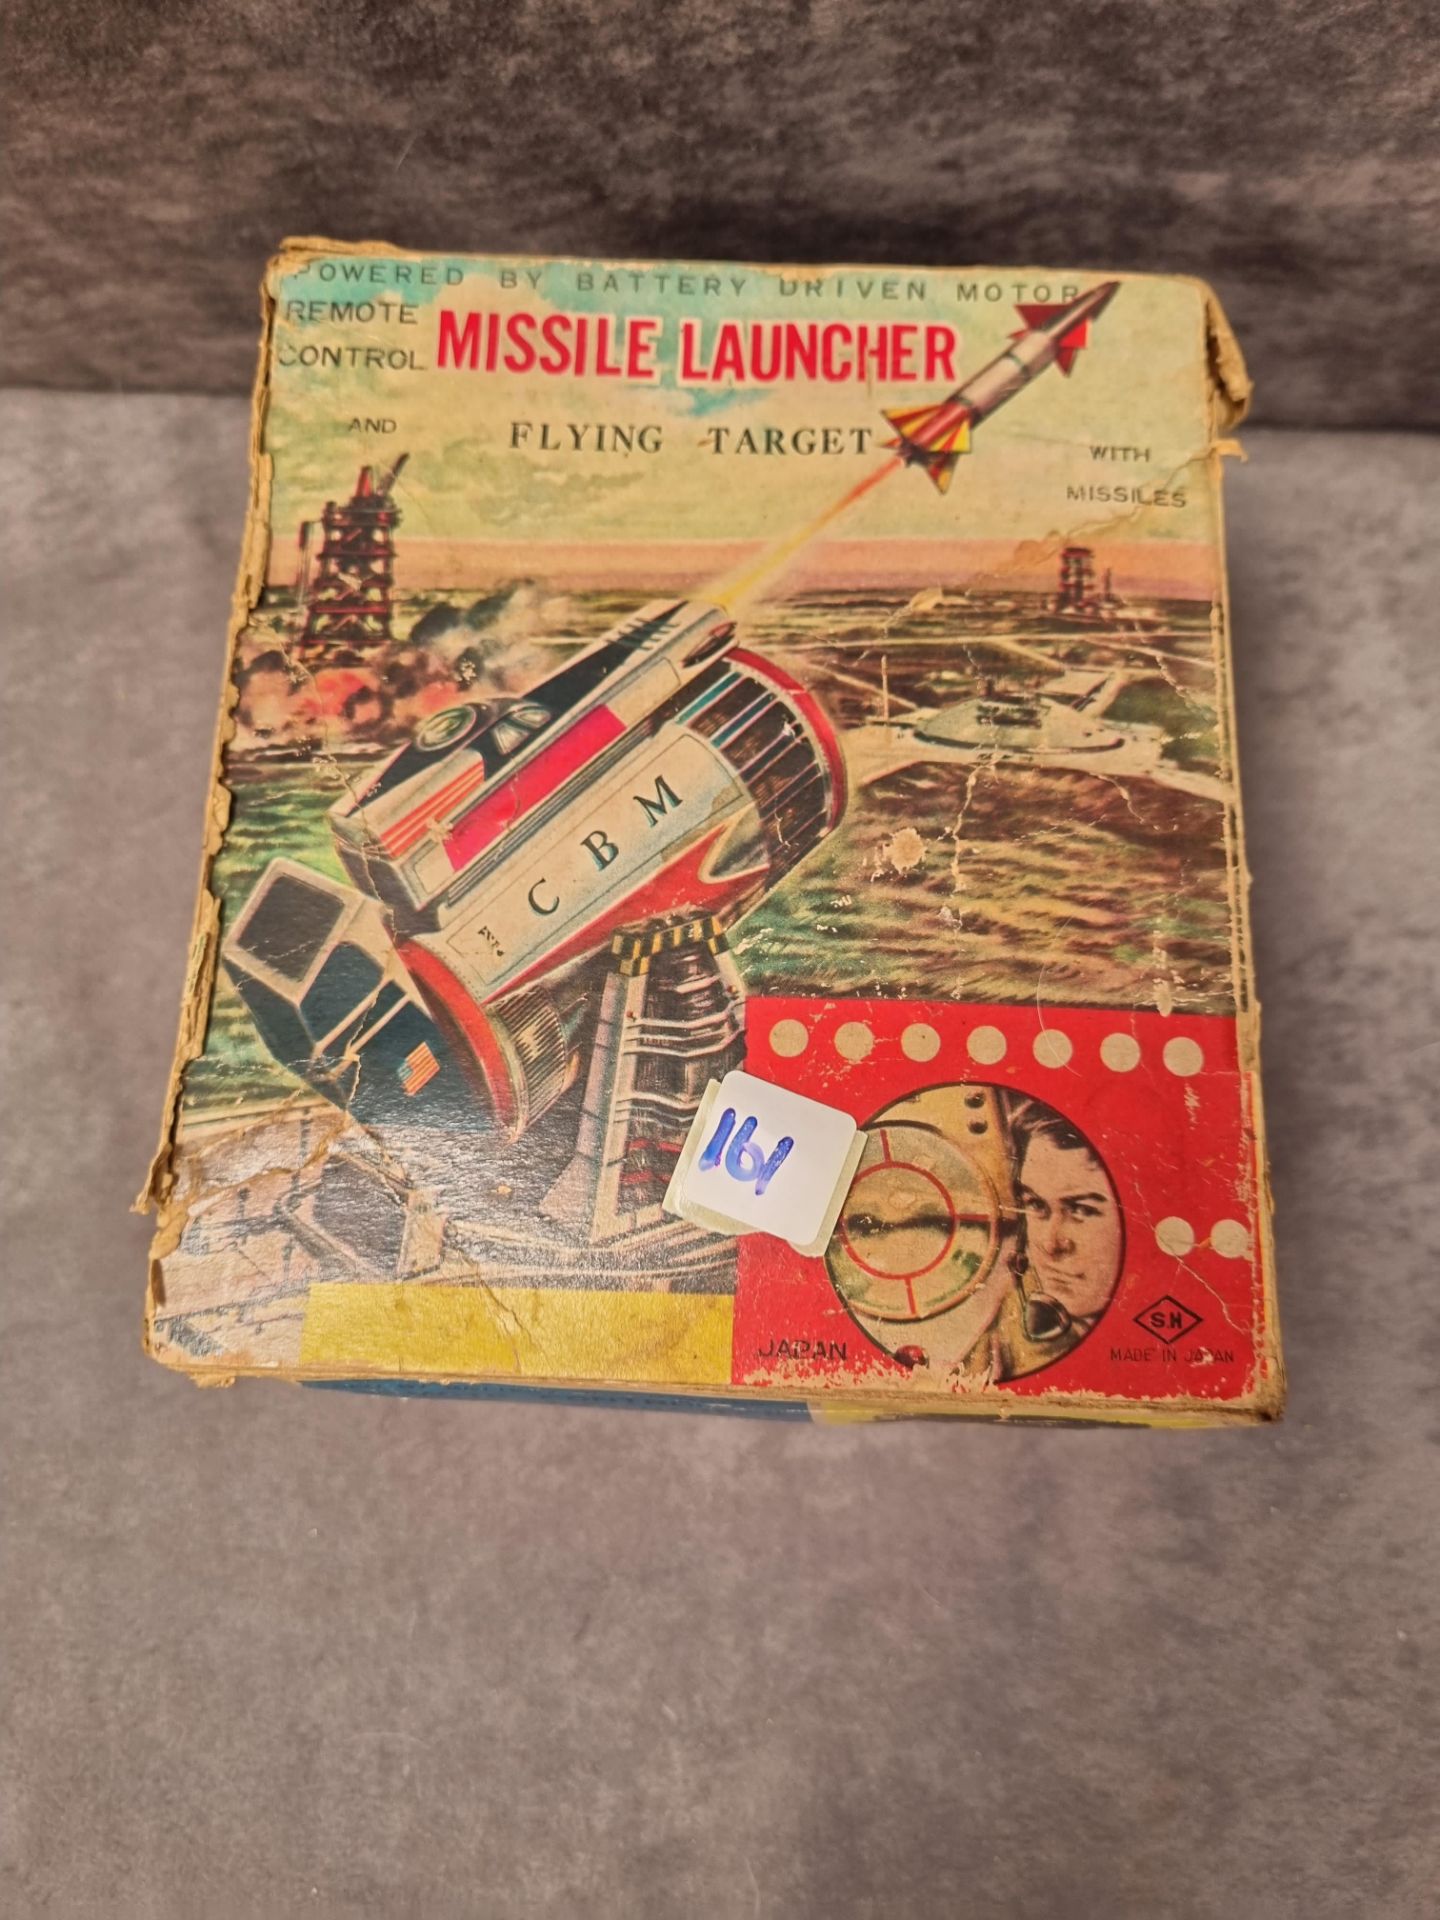 Vintage Cragstan Missile Launcher in Box made in Japan